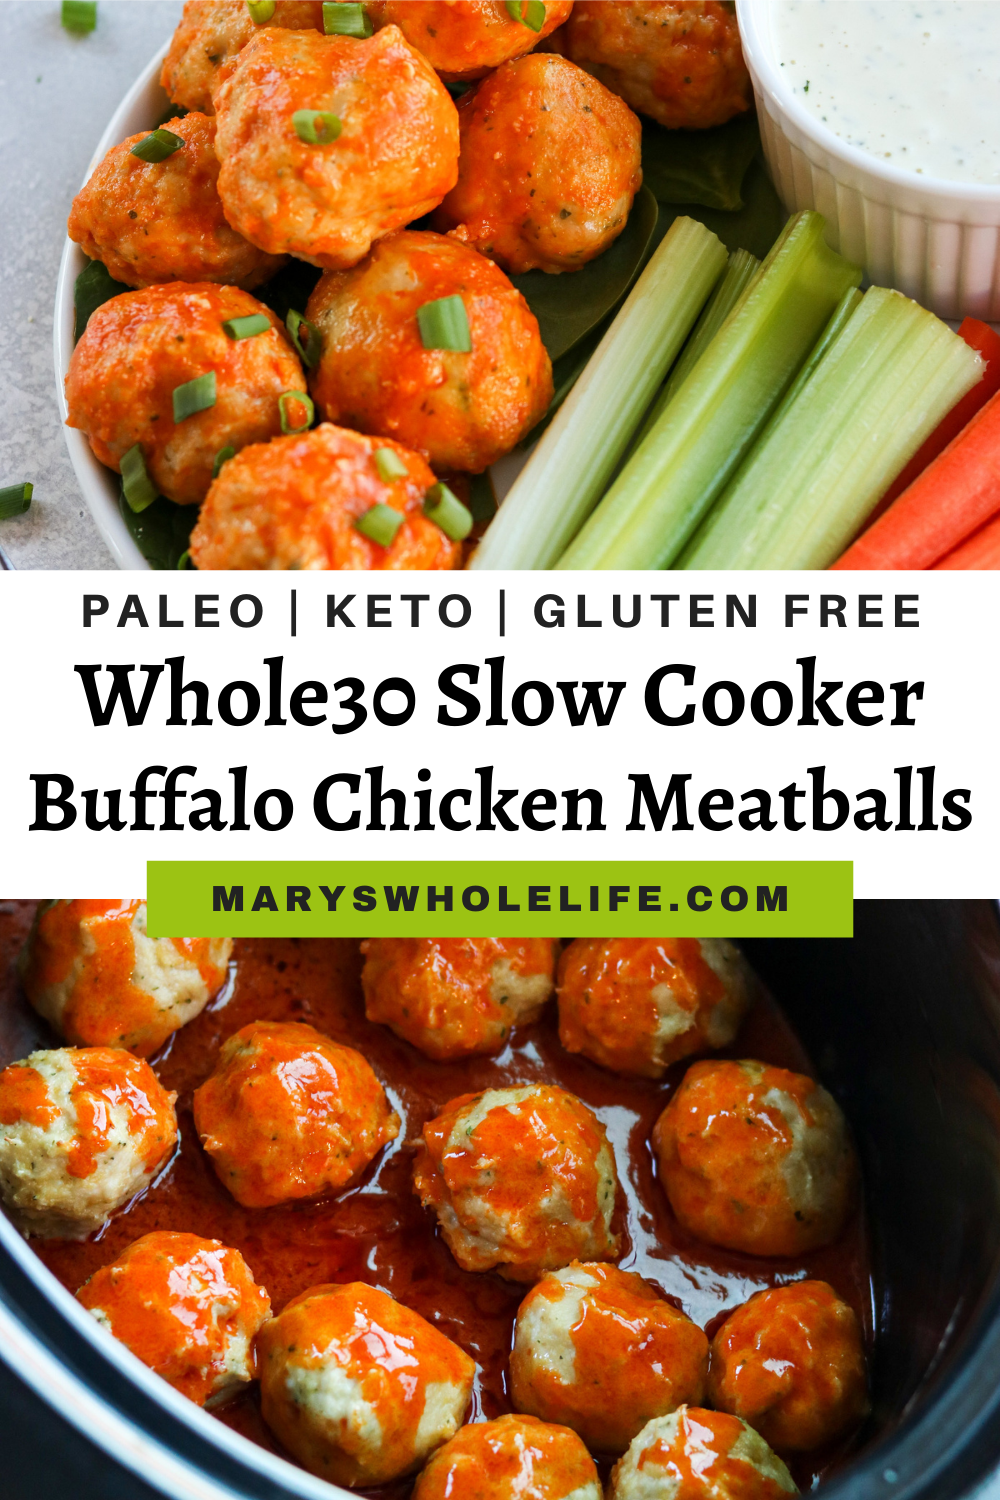 Whole30 Slow Cooker Buffalo Chicken Meatballs - Mary's Whole Life